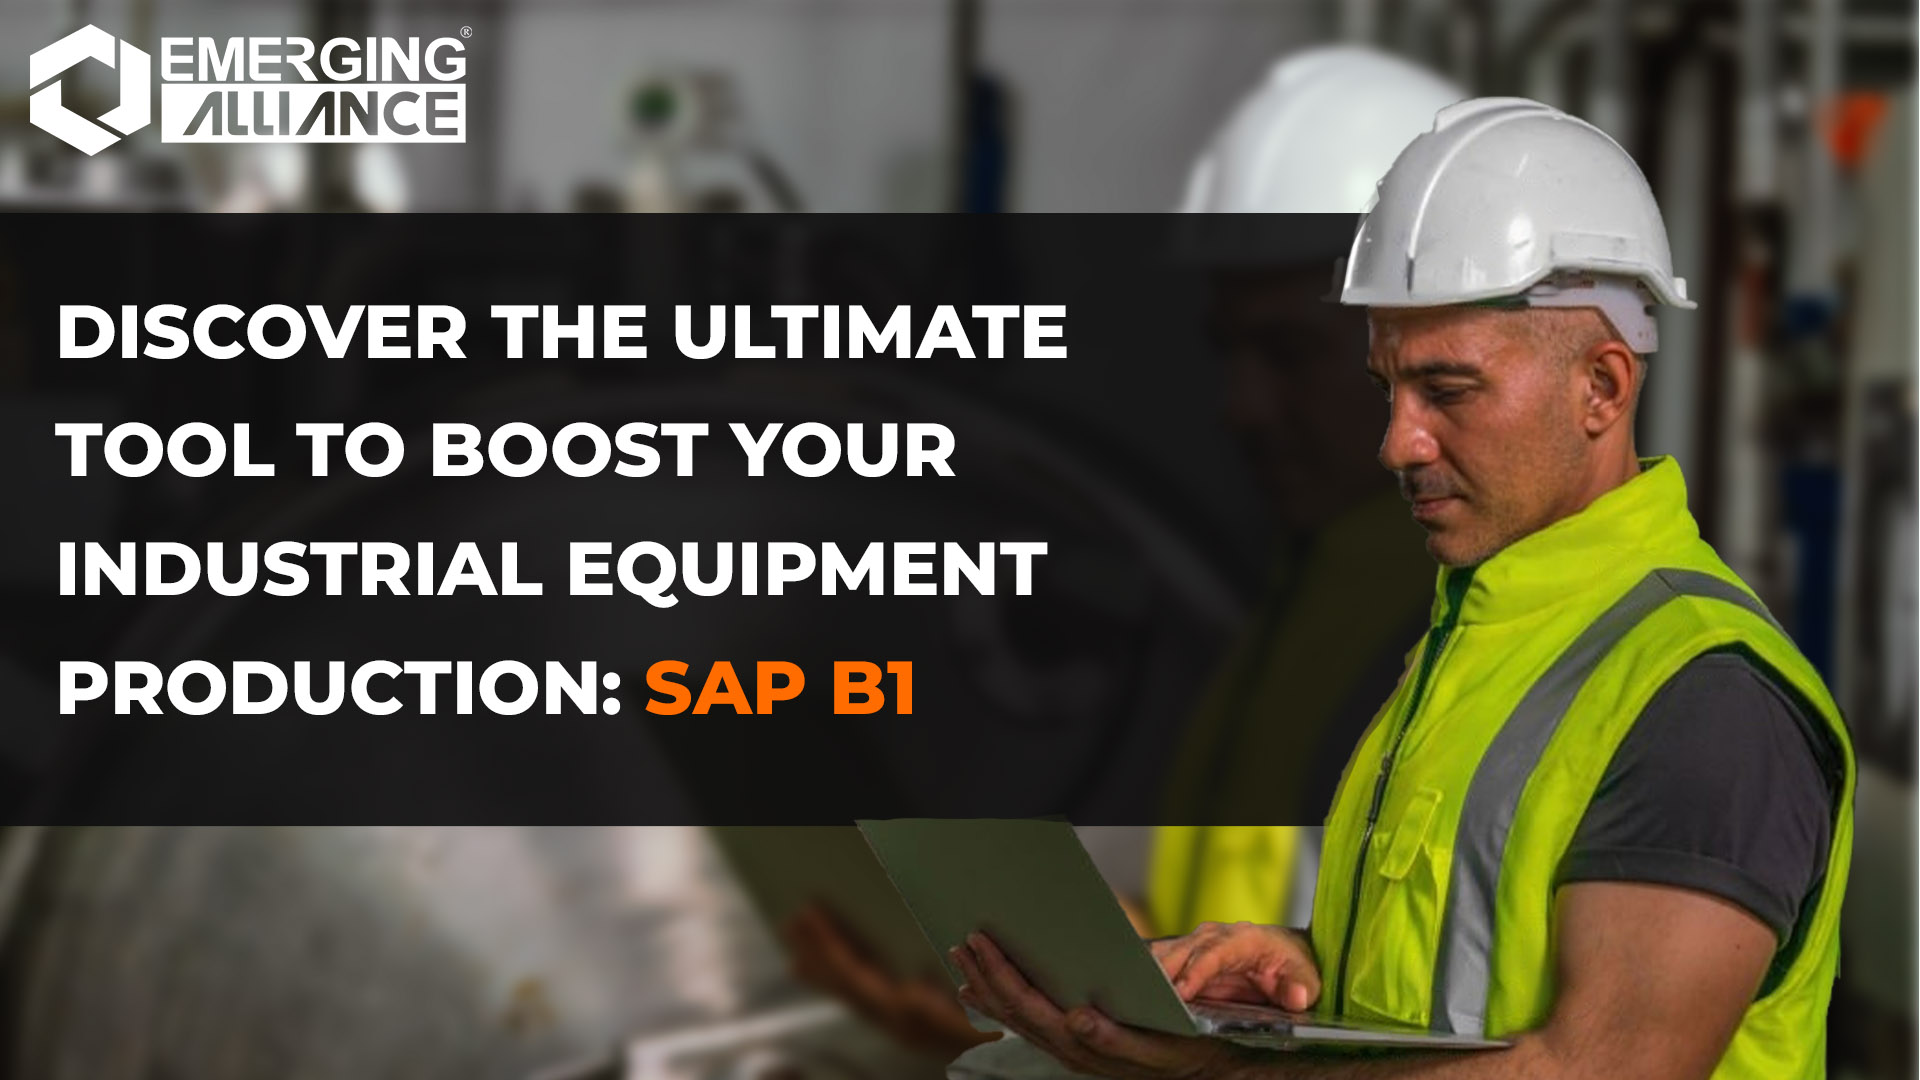 SAP B1 (SAP Business One) for Industrial Equipment Production